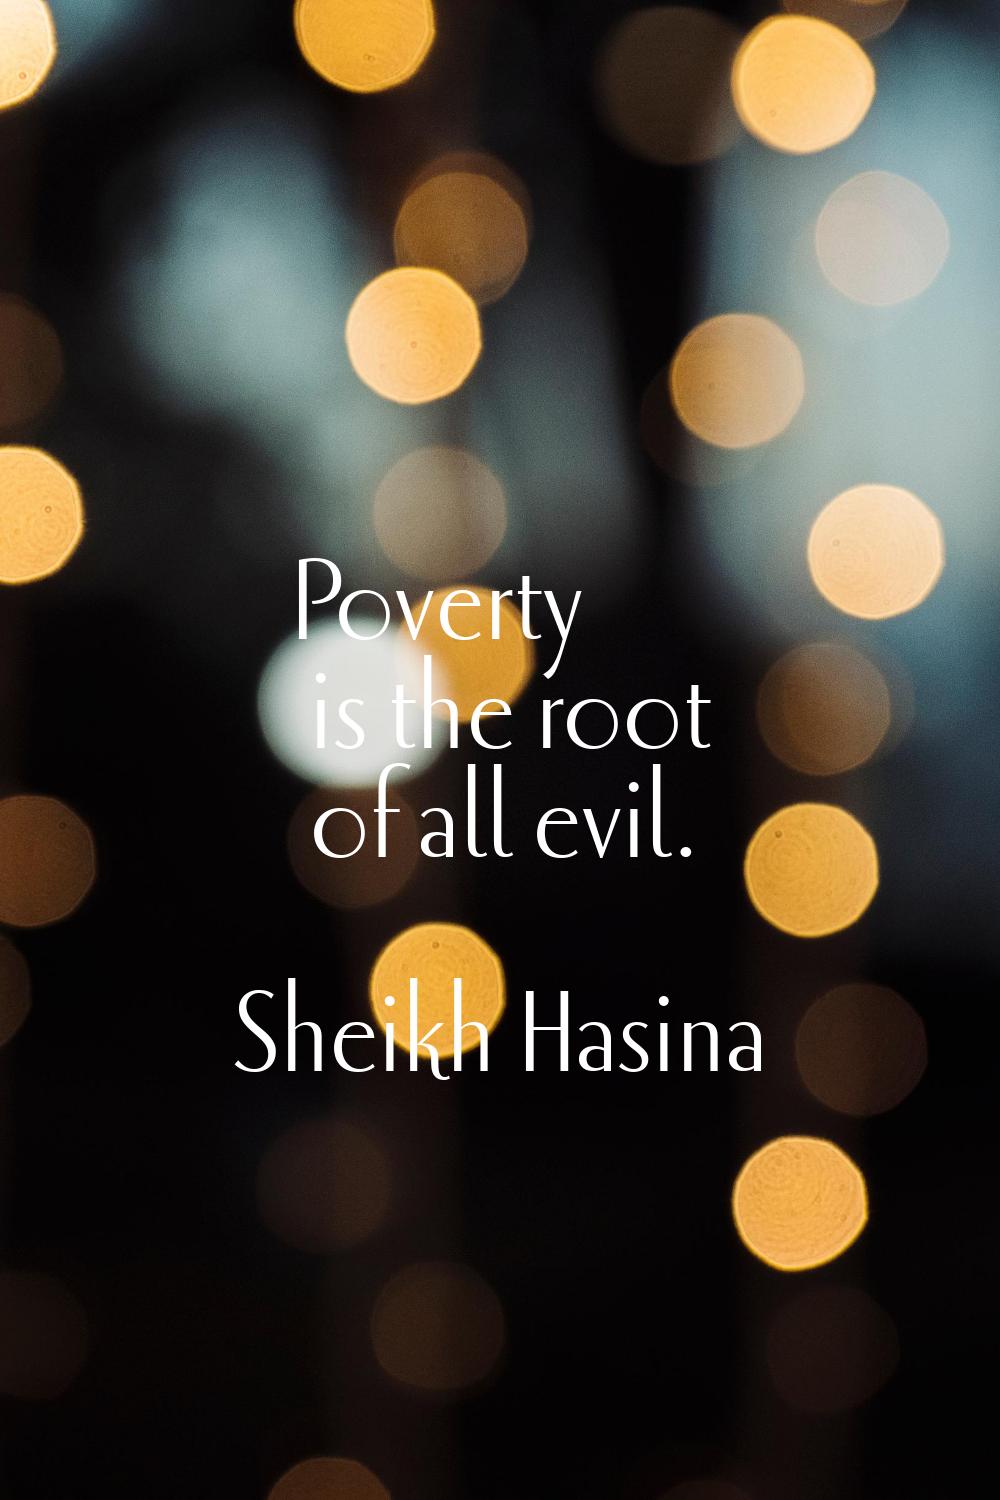 Poverty is the root of all evil.